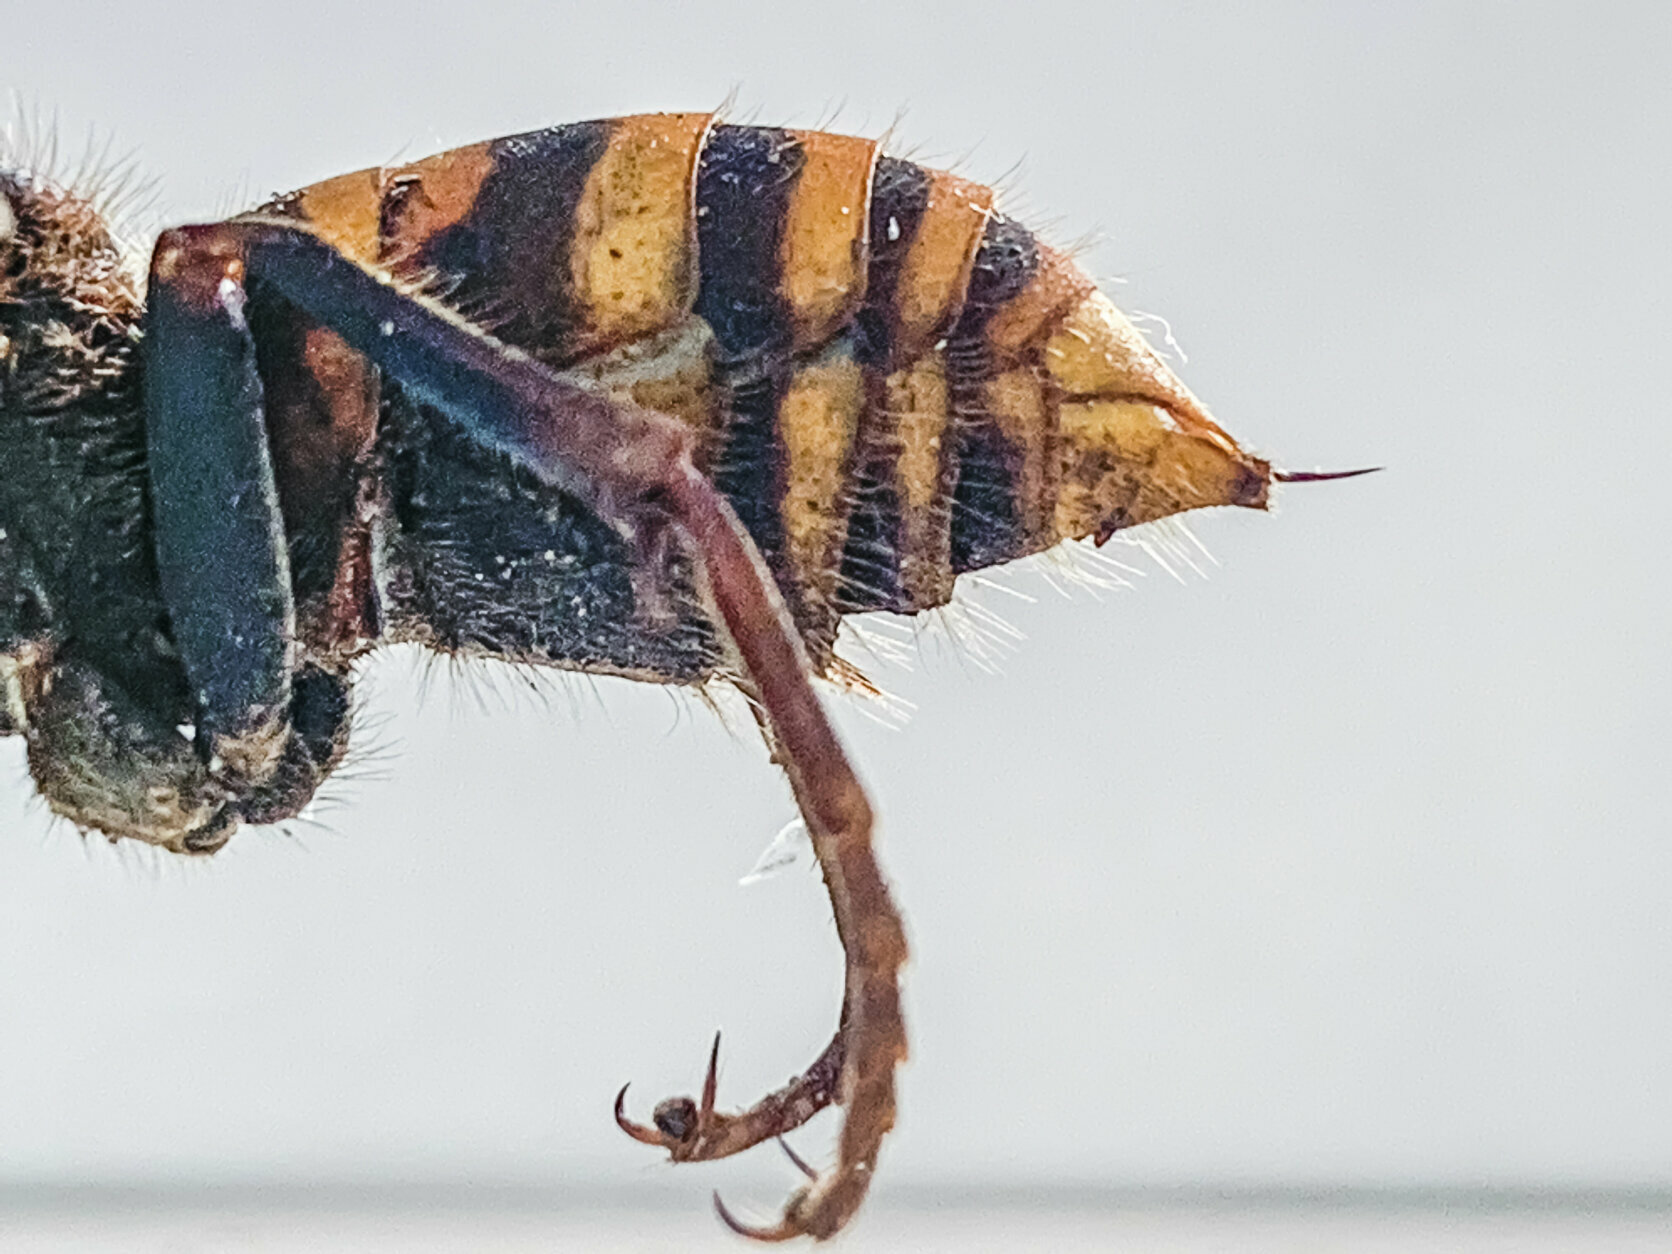 <p>In this Dec. 30, 2019, photo provided by the Washington State Department of Agriculture, the stinger of a dead Asian giant hornet is photographed in a lab in Olympia, Wash. The world&#8217;s largest hornet, a 2-inch long killer with an appetite for honey bees, has been found in Washington state and entomologists are making plans to wipe it out. Dubbed the &#8220;Murder Hornet&#8221; by some, the Asian giant hornet has a sting that could be fatal to some humans. It is just now starting to emerge from hibernation. (Karla Salp/Washington State Department of Agriculture via AP)</p>
